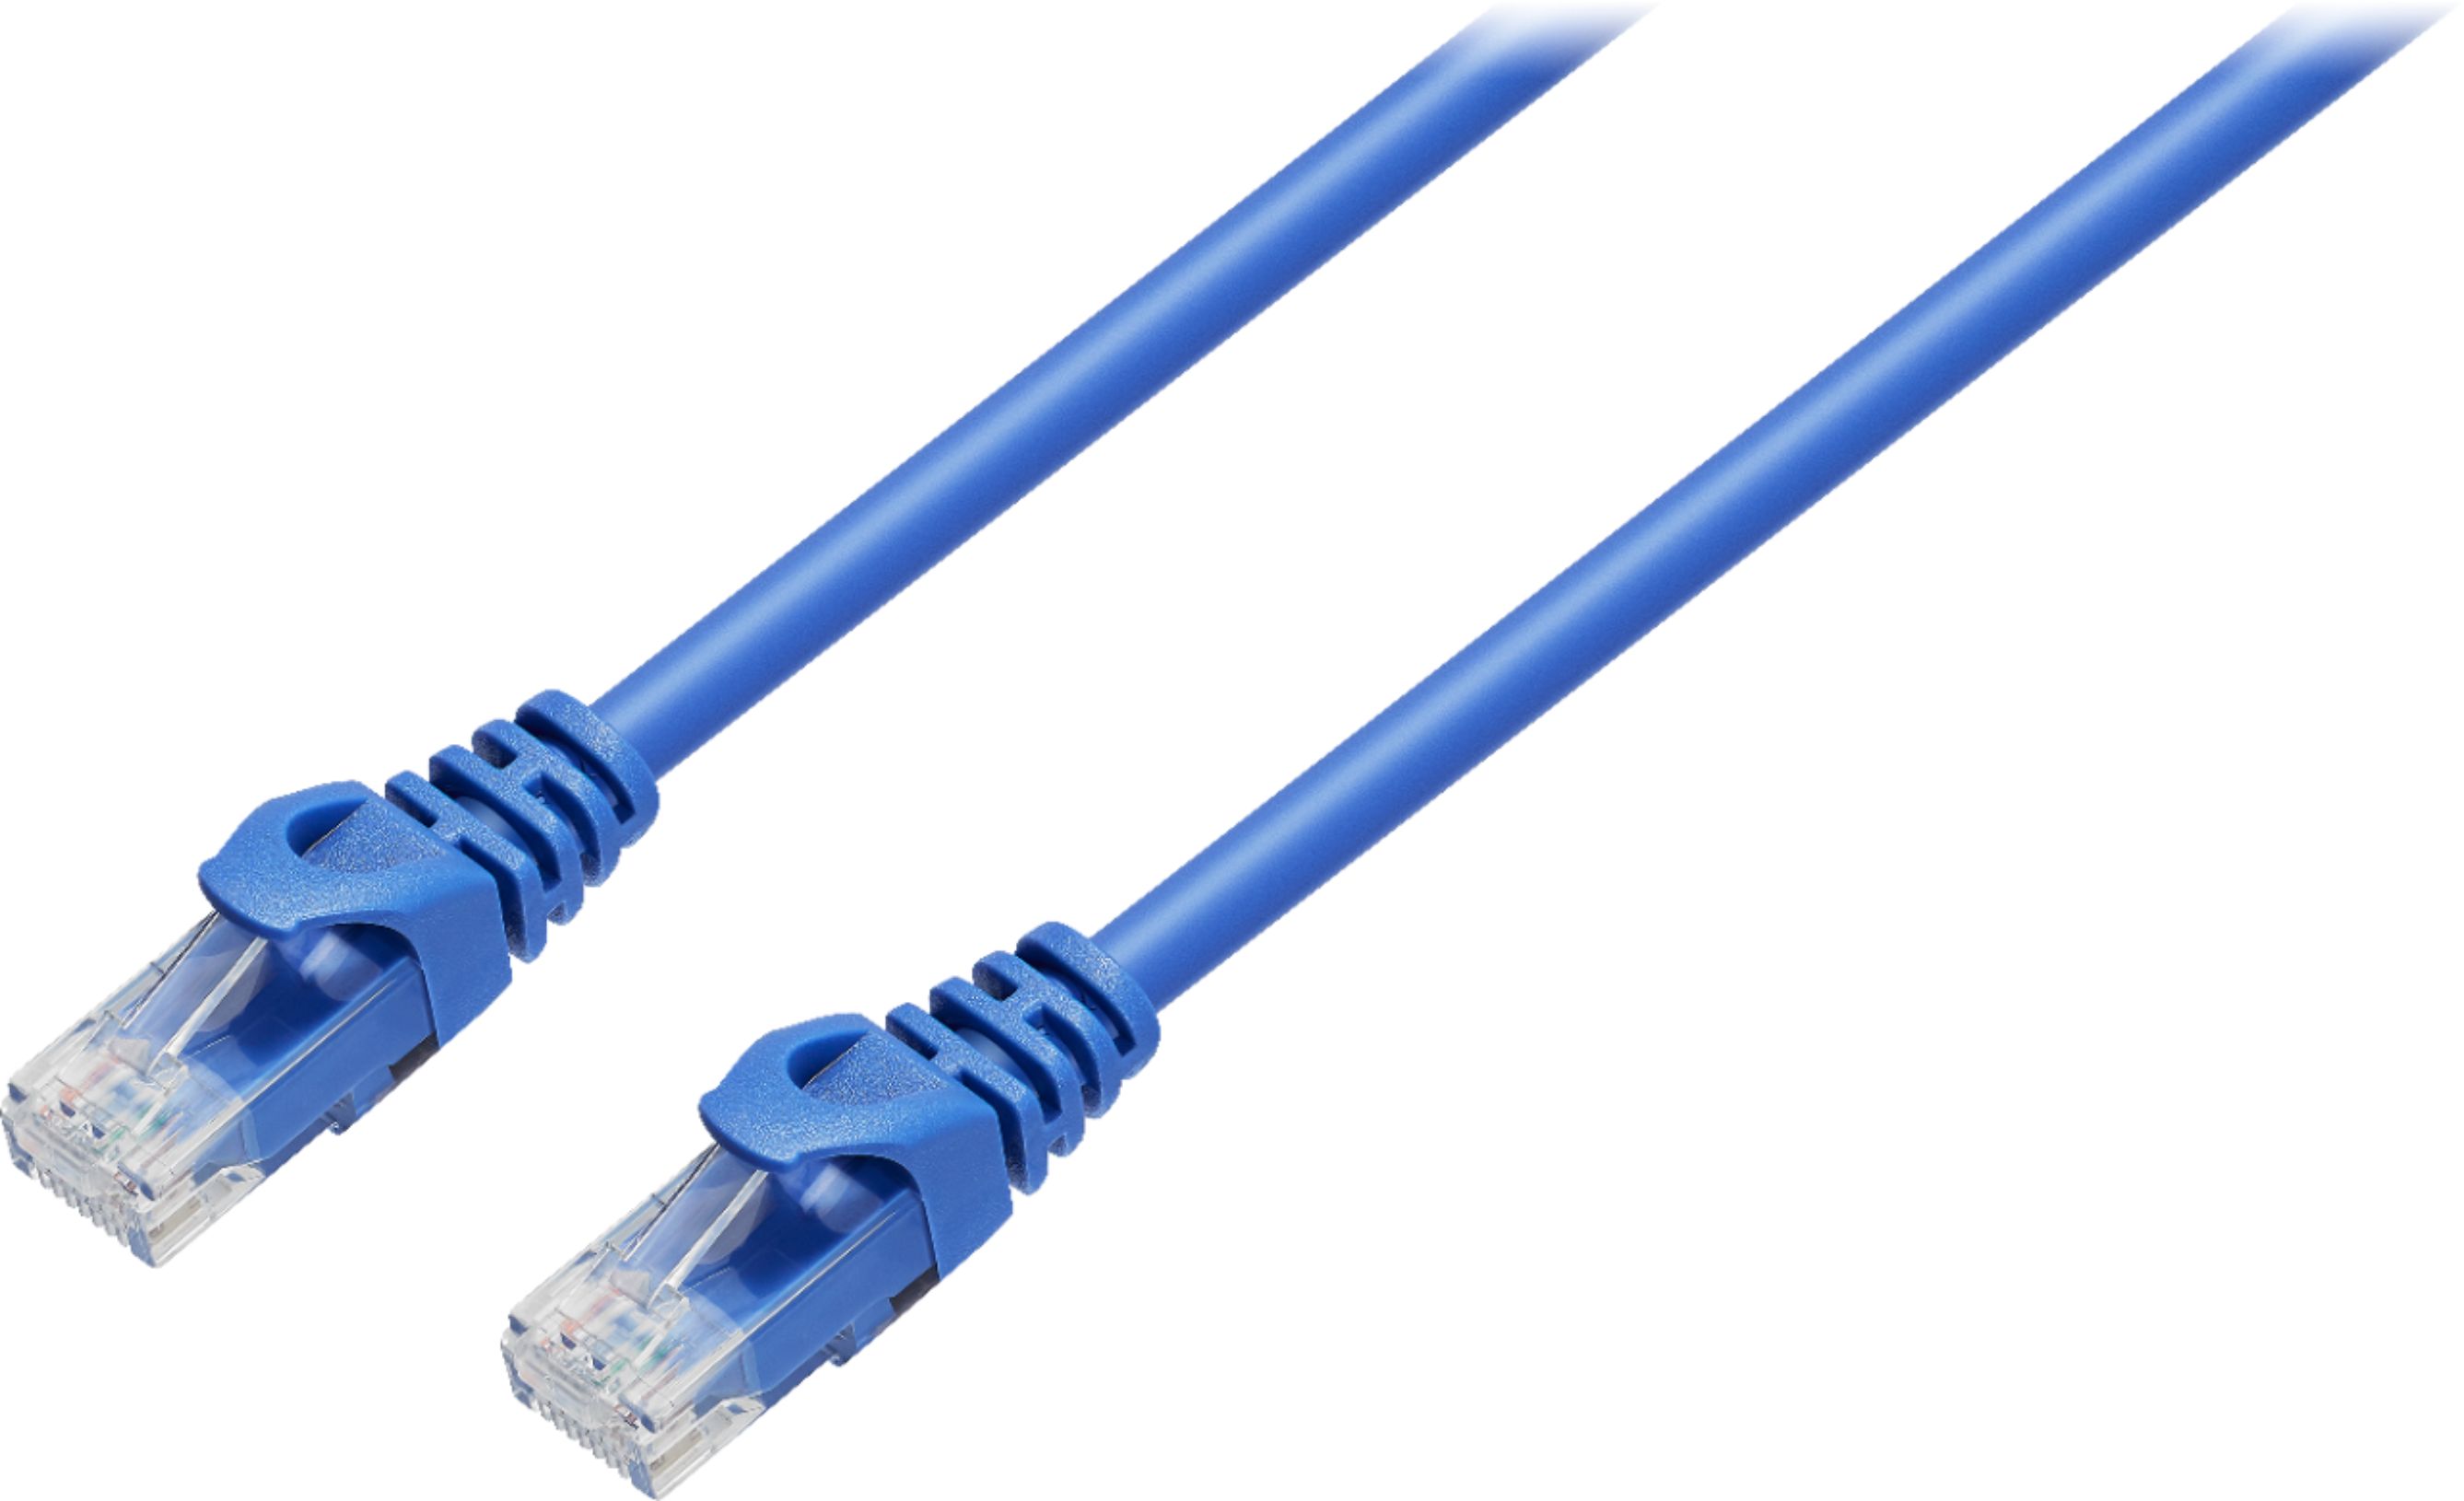 Please use ethernet cables whenever you can. Please.